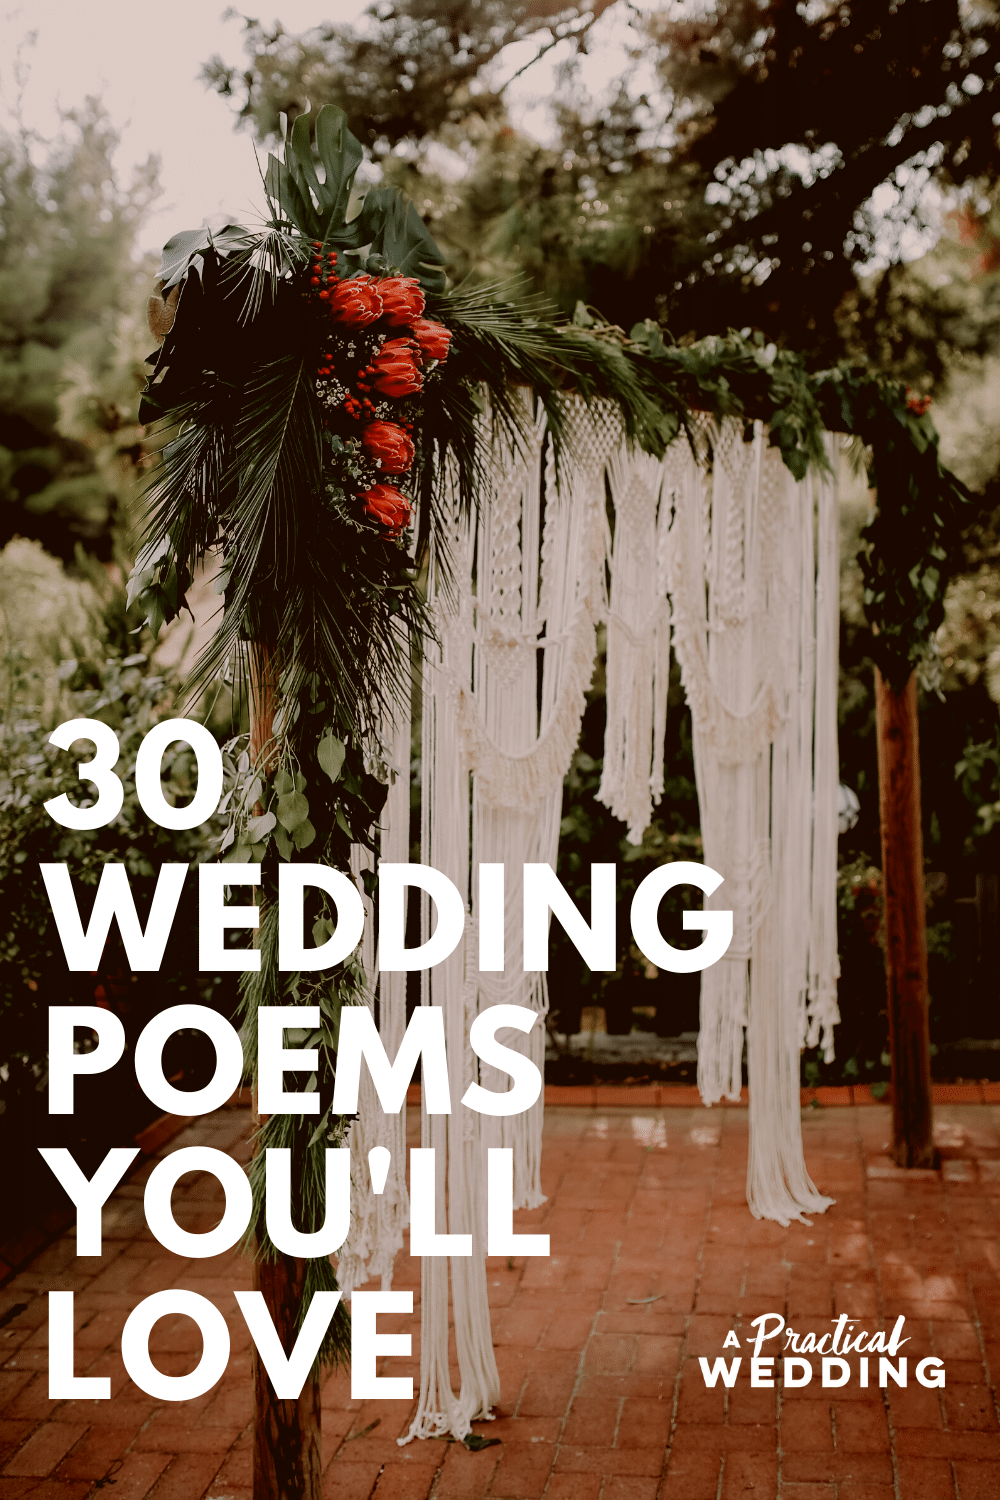 Weddig ceremony backdrop with words "30 wedding poems you'll love"